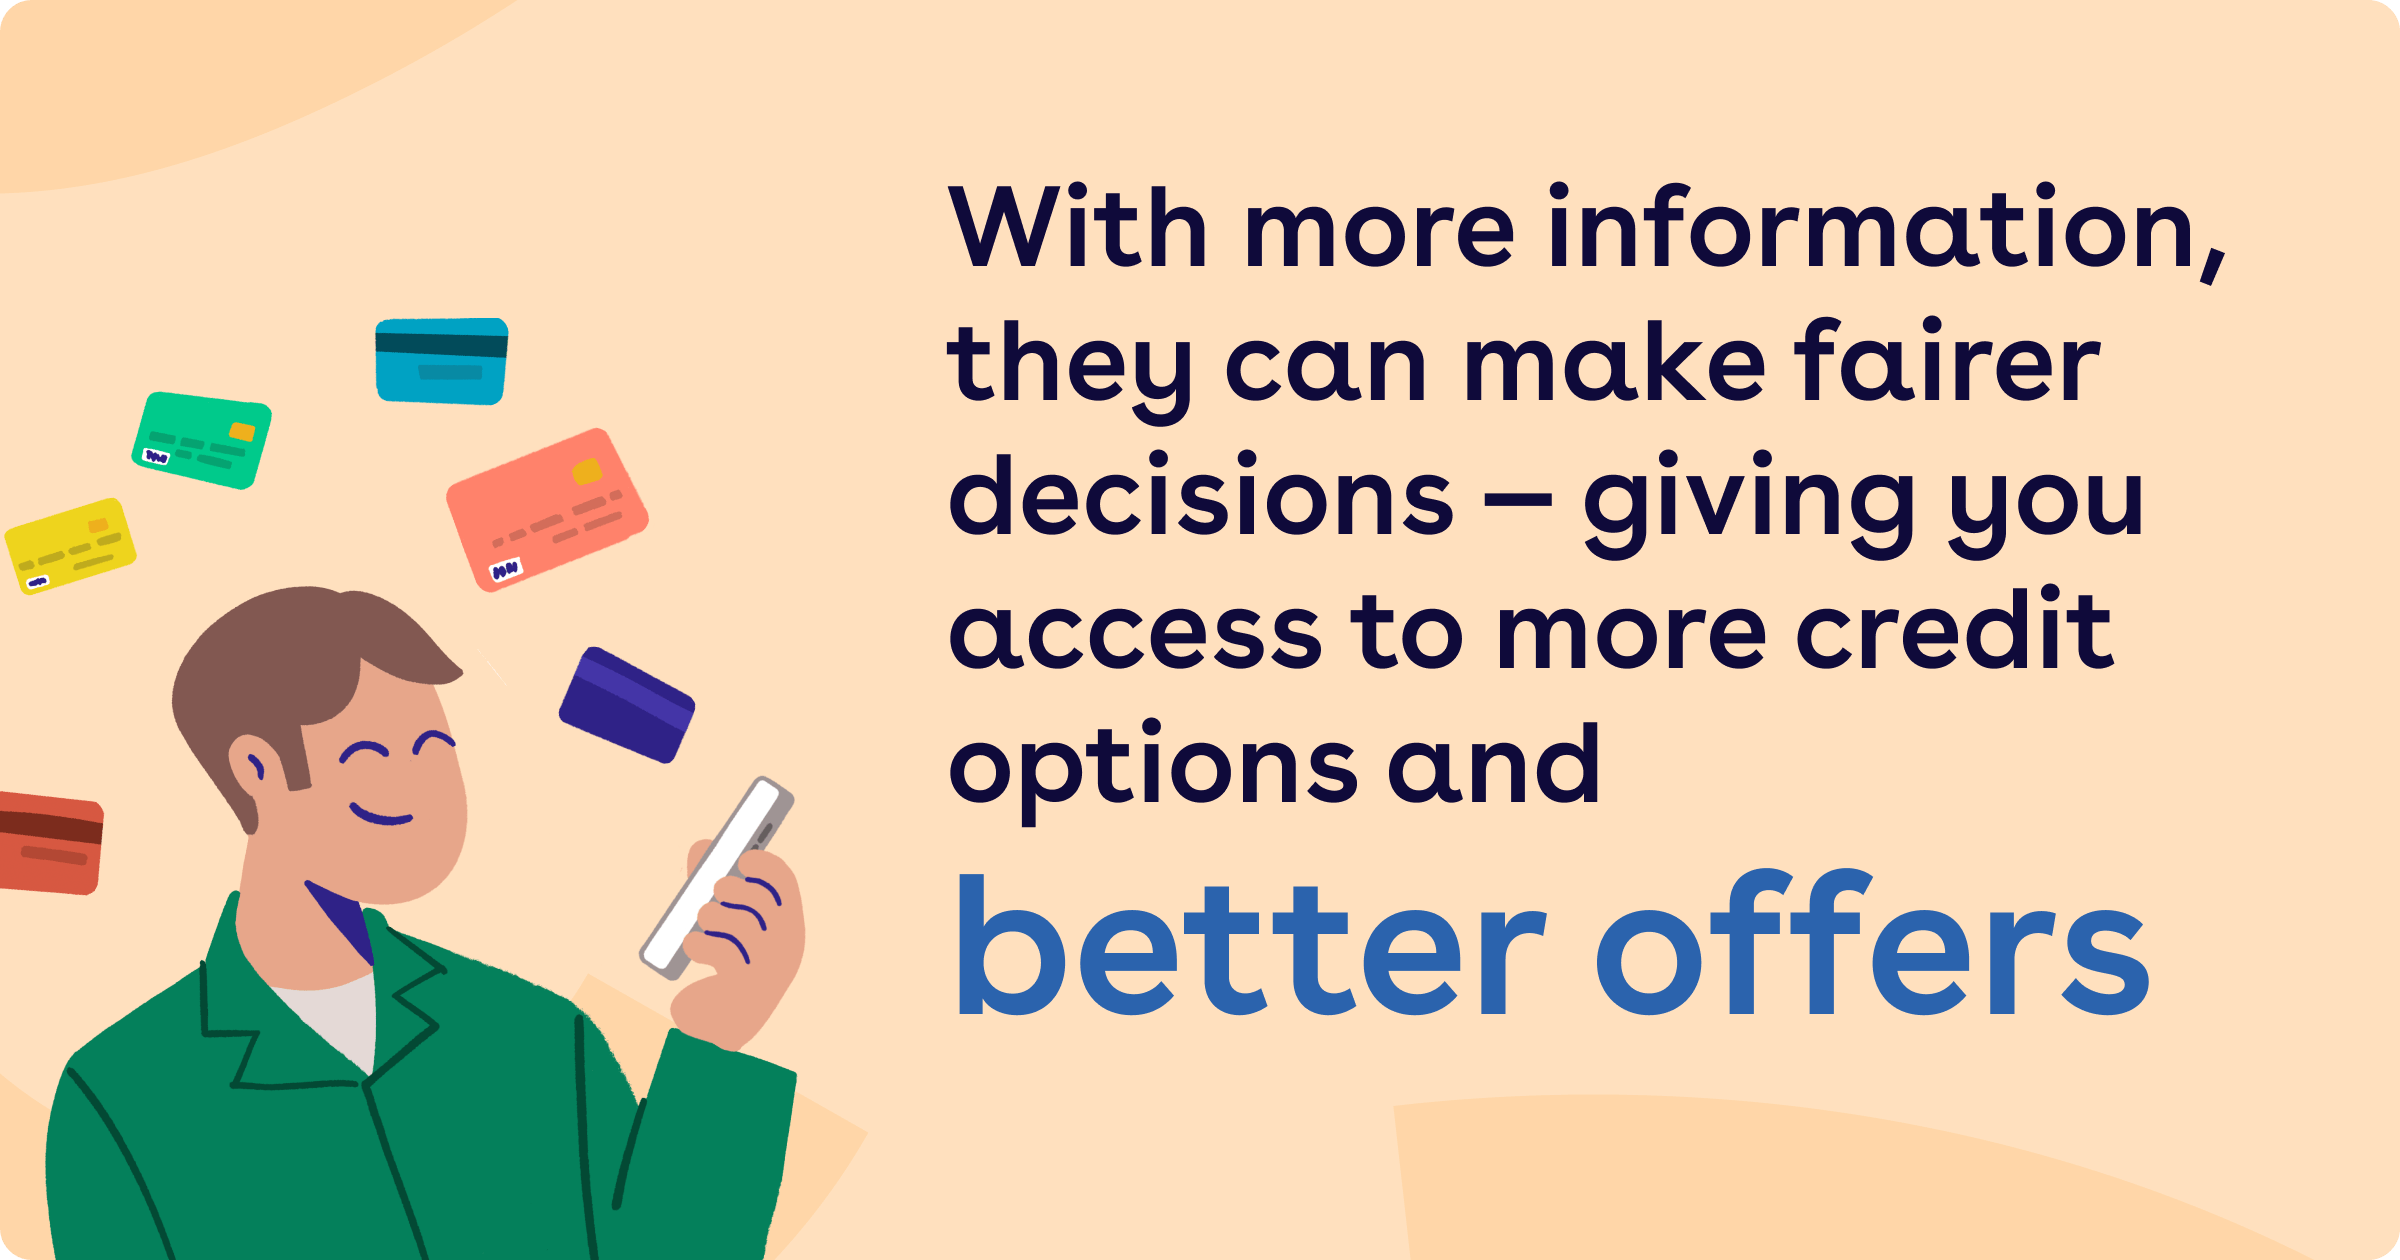 With more information, they can make fairer decisions - giving you access to more credit options and better offers